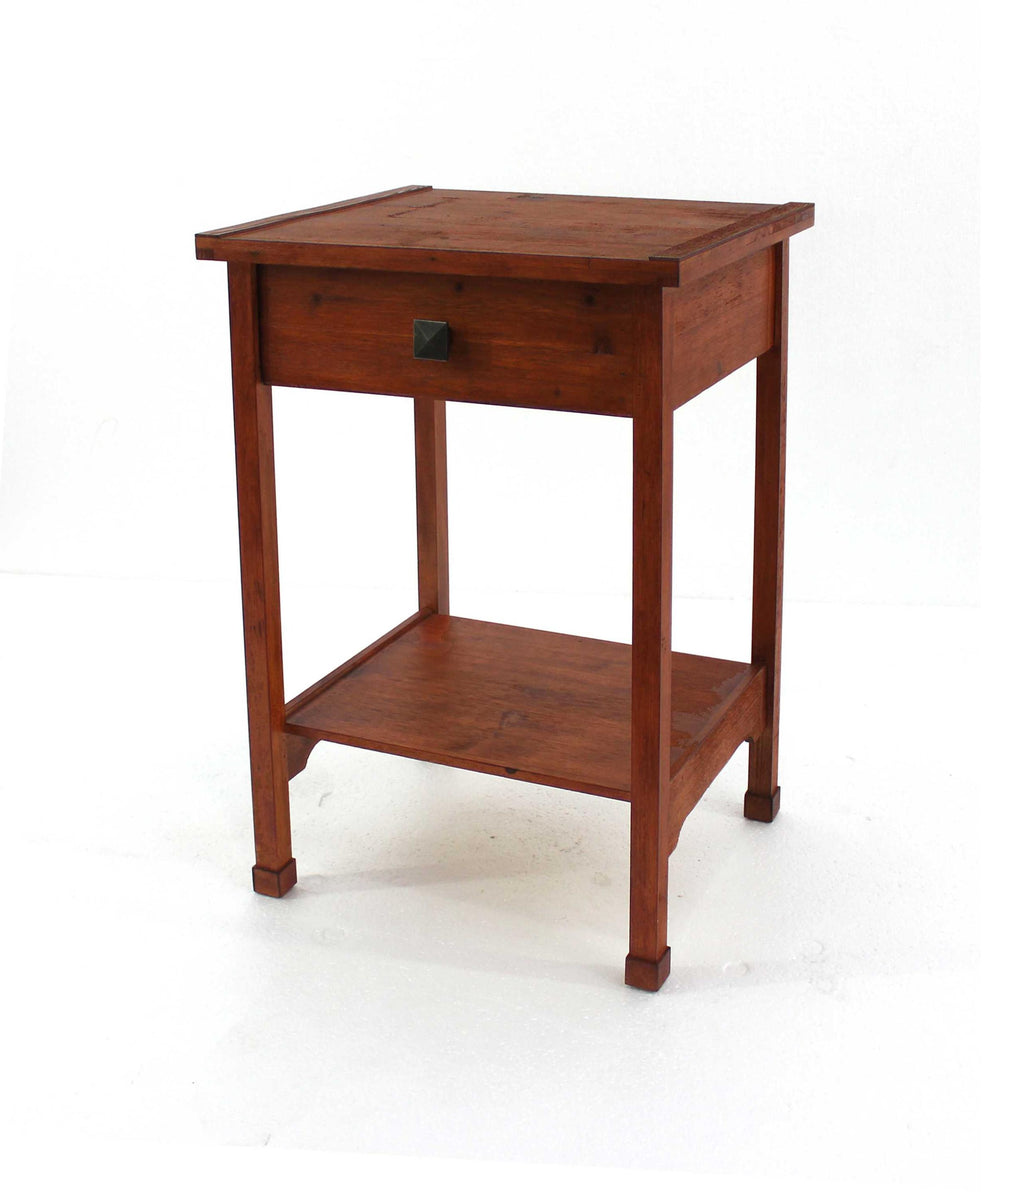 24" X 15" X 18" Cherry 1 Drawer Rustic Wooden Accent Table